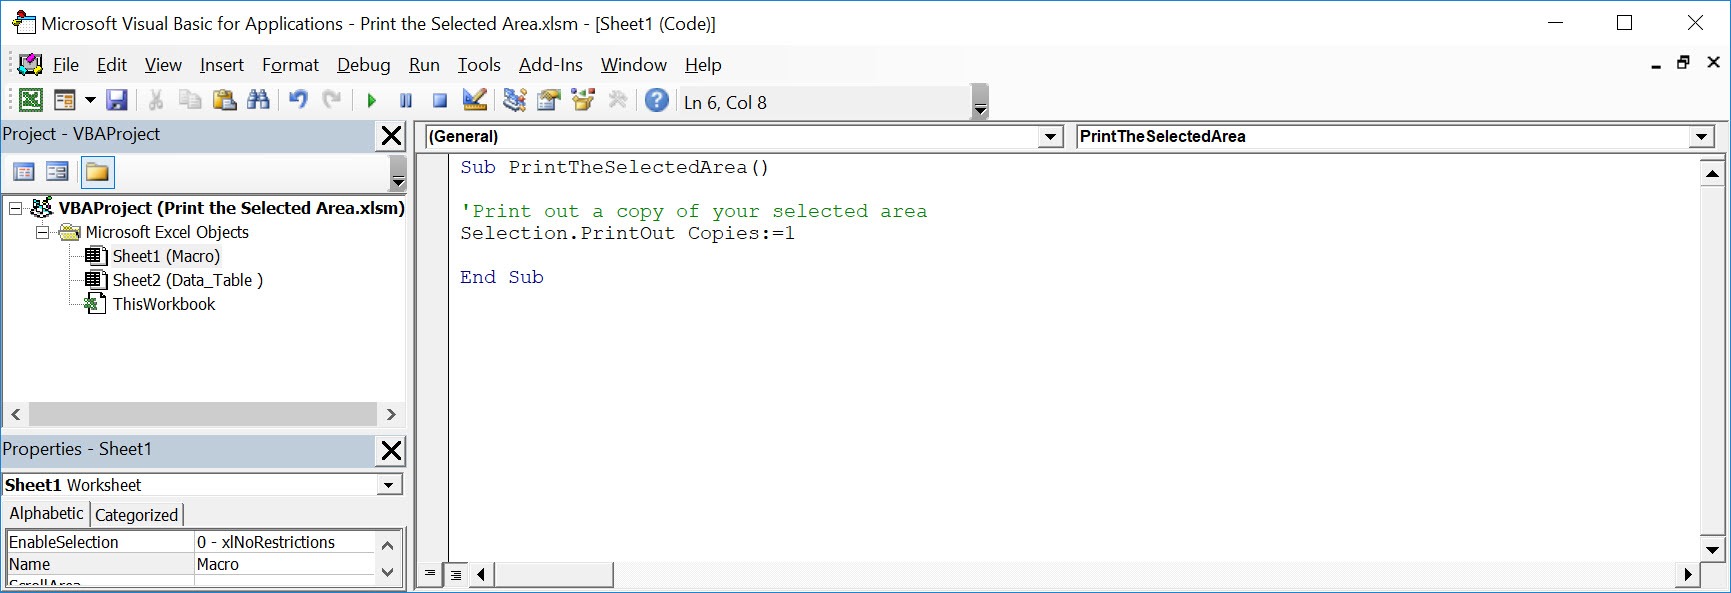 Print the Selected Area Using Macros In Excel | MyExcelOnline